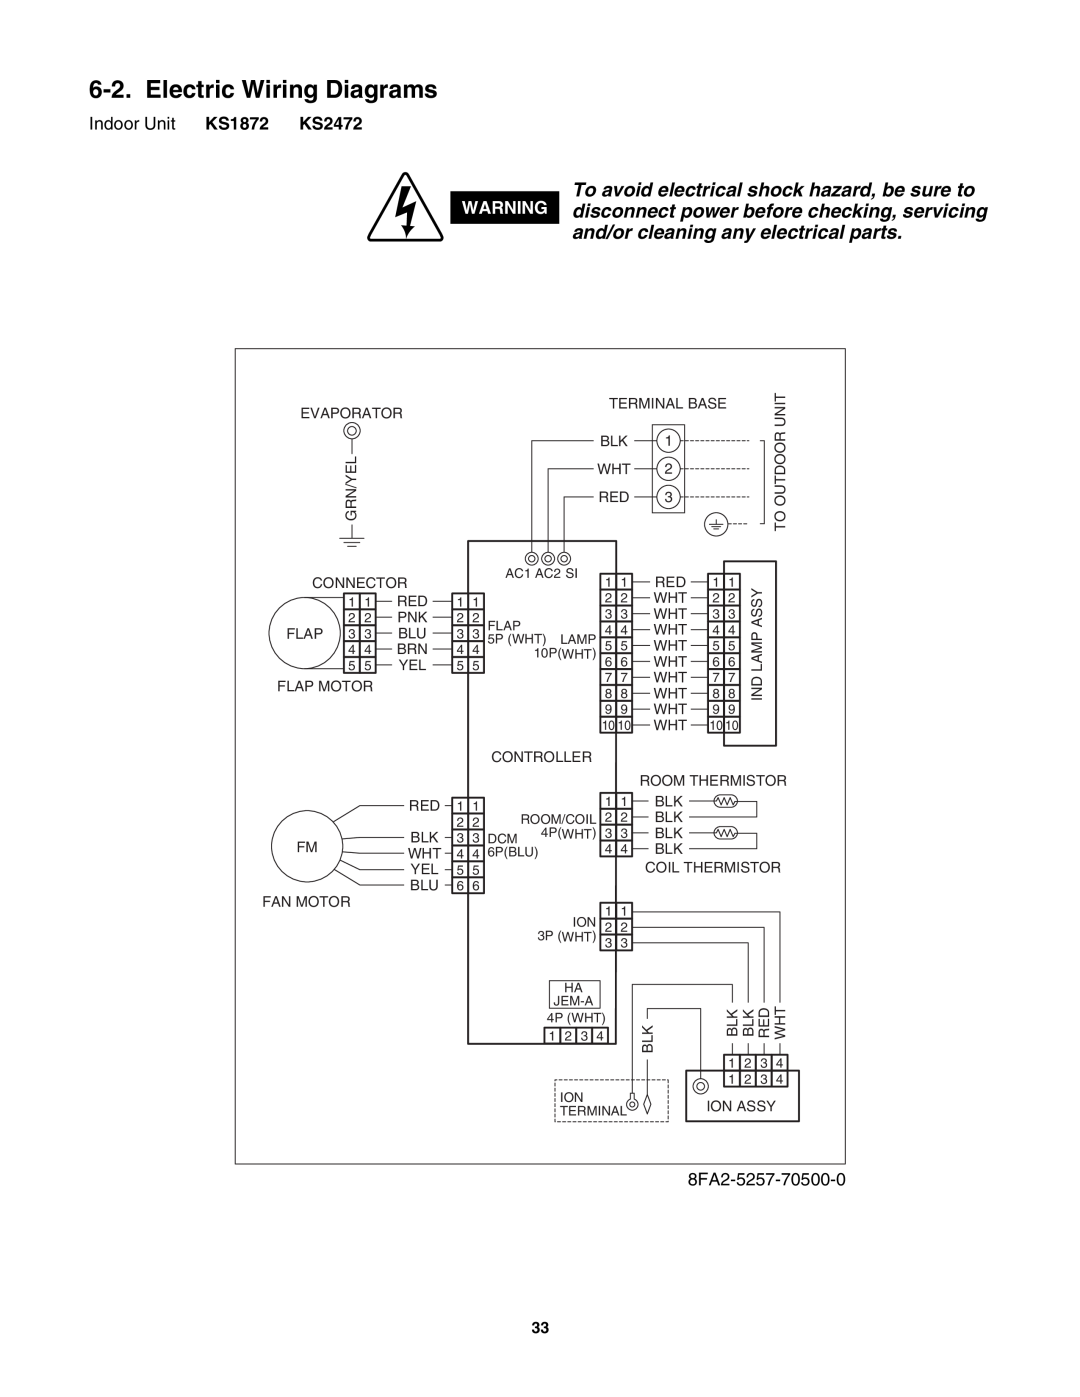 Sanyo C1872, C2472, CL2472, CL1872 service manual Electric Wiring Diagrams, and/or cleaning any electrical parts 